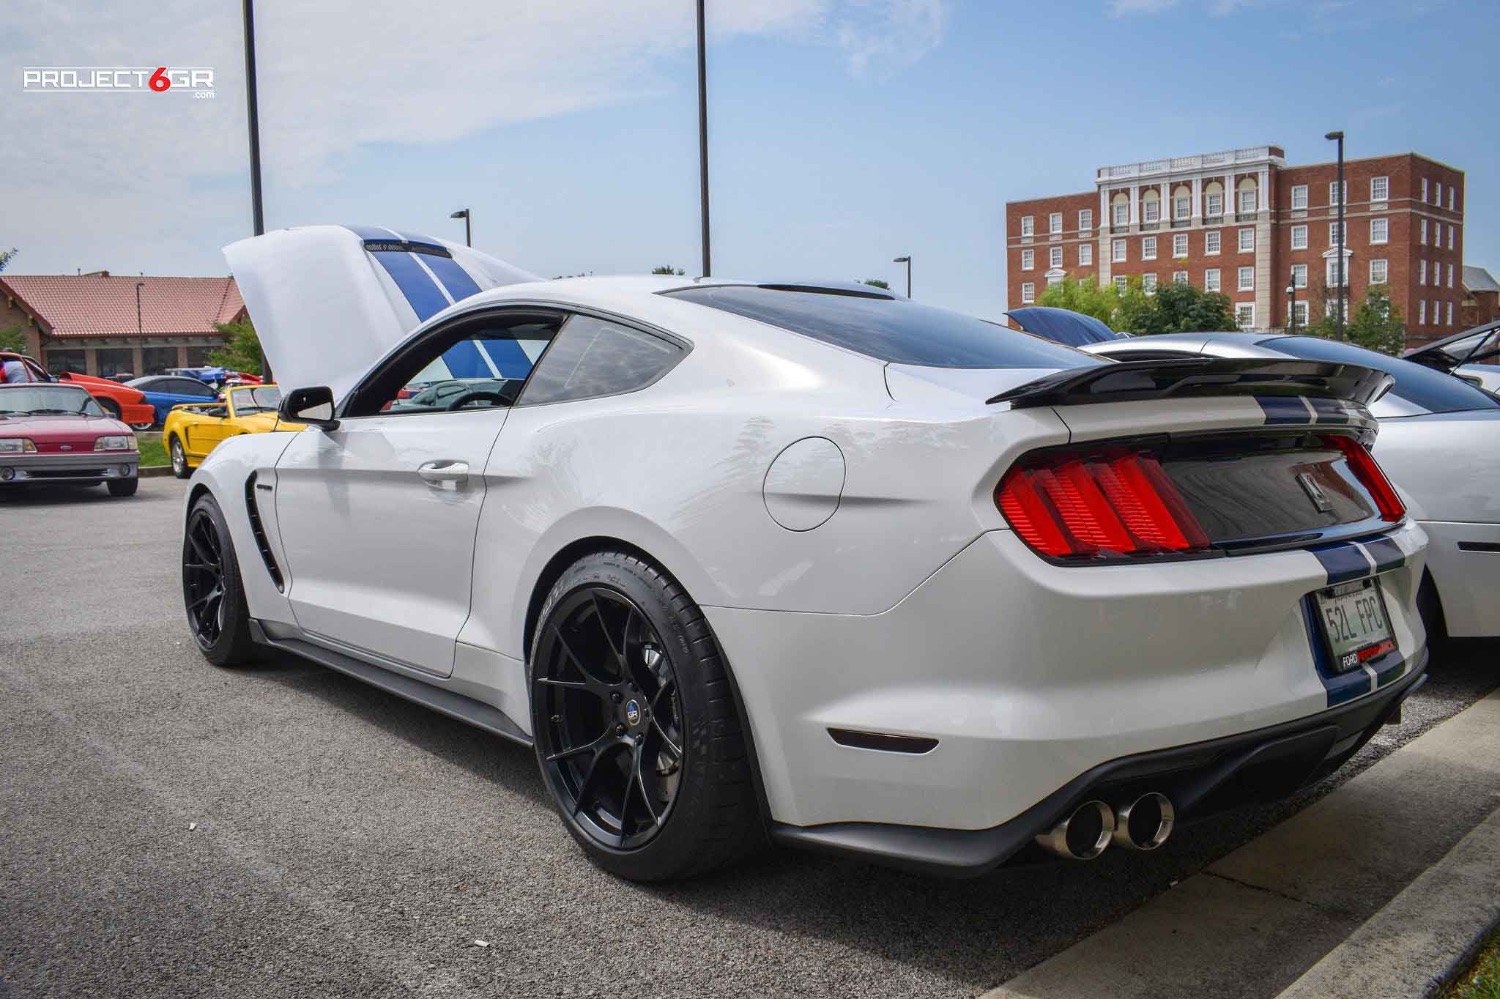 project-6gr-10-ten-ox-ford-whiteshelby-gt350-gloss-black-wheels-02